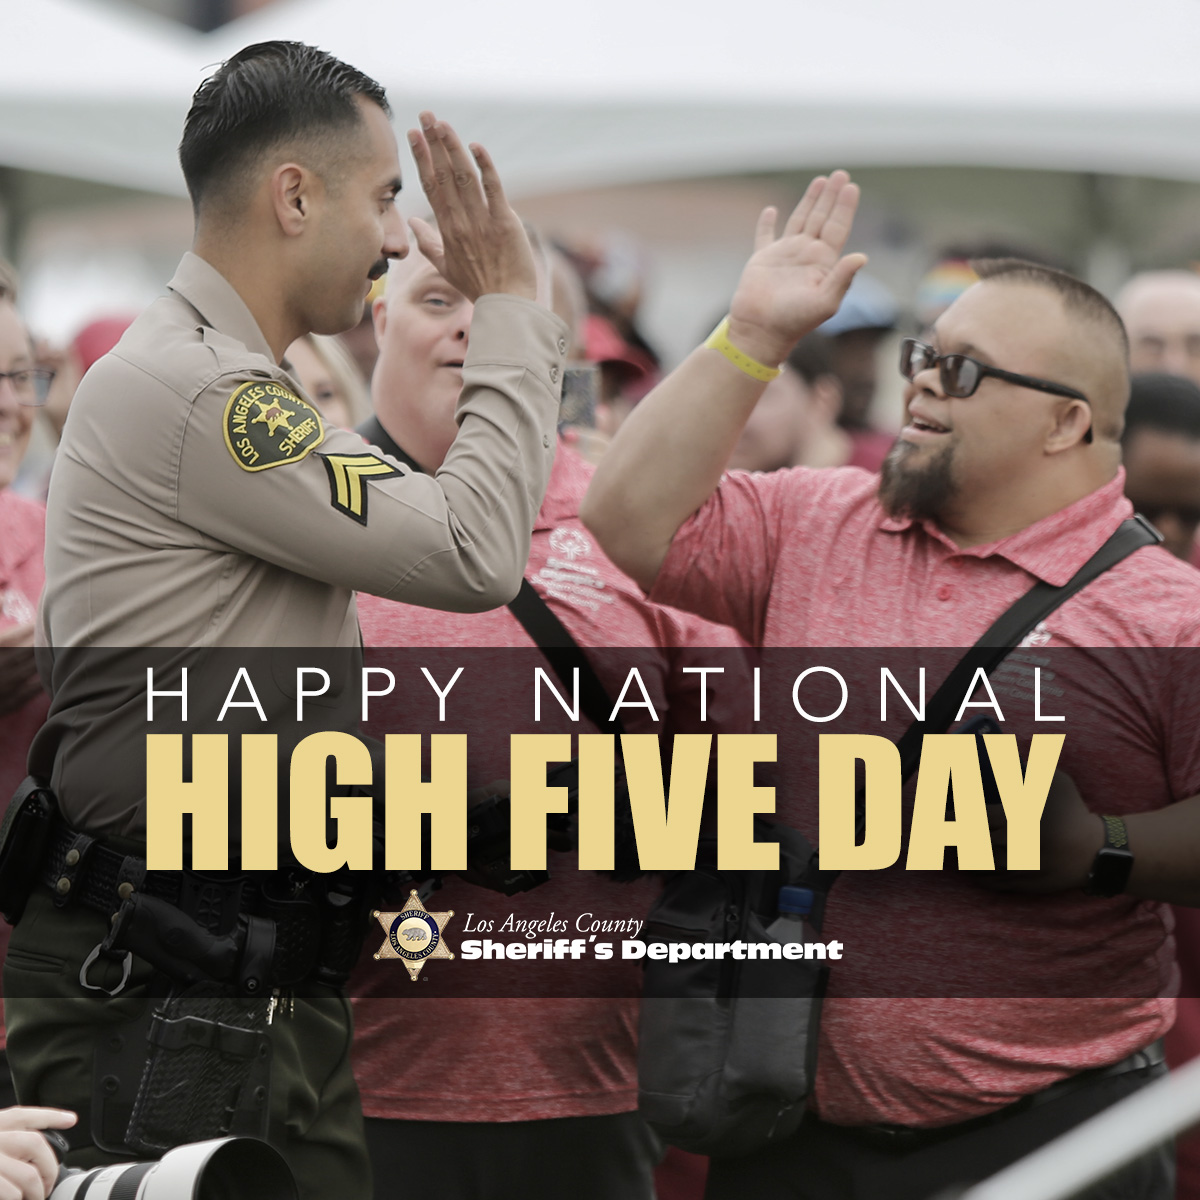 #NationalHighFiveDay is a reminder that every little success in life deserves a bit of celebration, the high five serves as a universal form of celebration! The Los Angeles Sheriff’s Department would like to join in spreading high fives and good vibes throughout the day! #LASDHQ